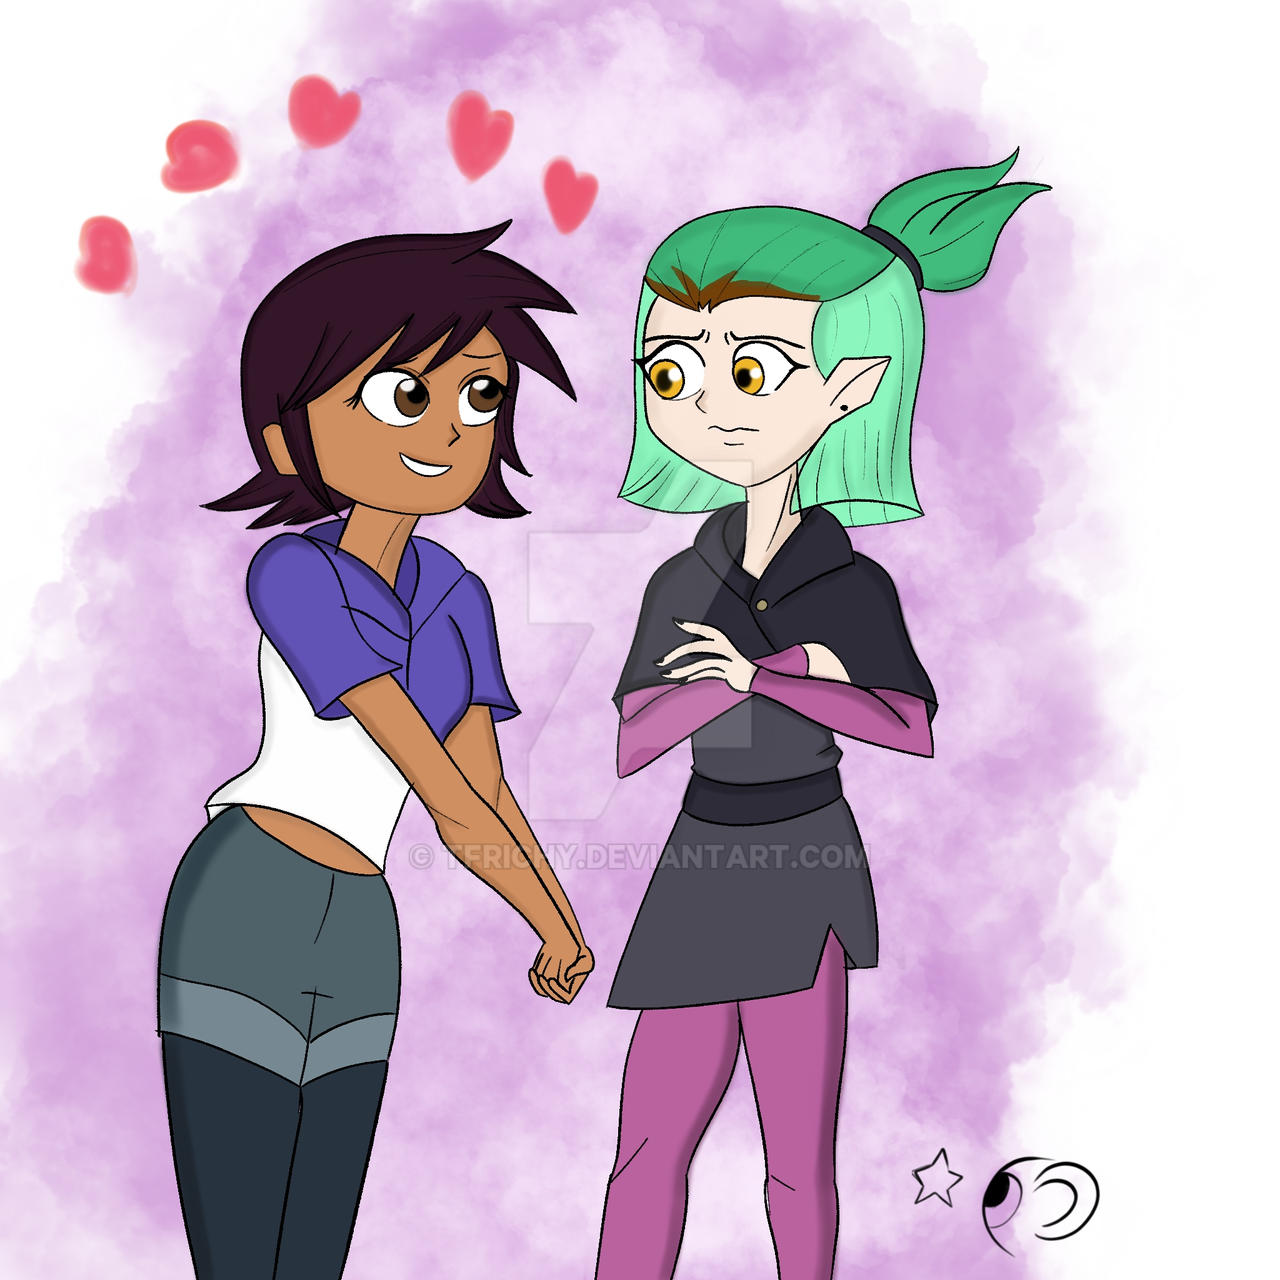 luz and amity by Tfrichy on DeviantArt